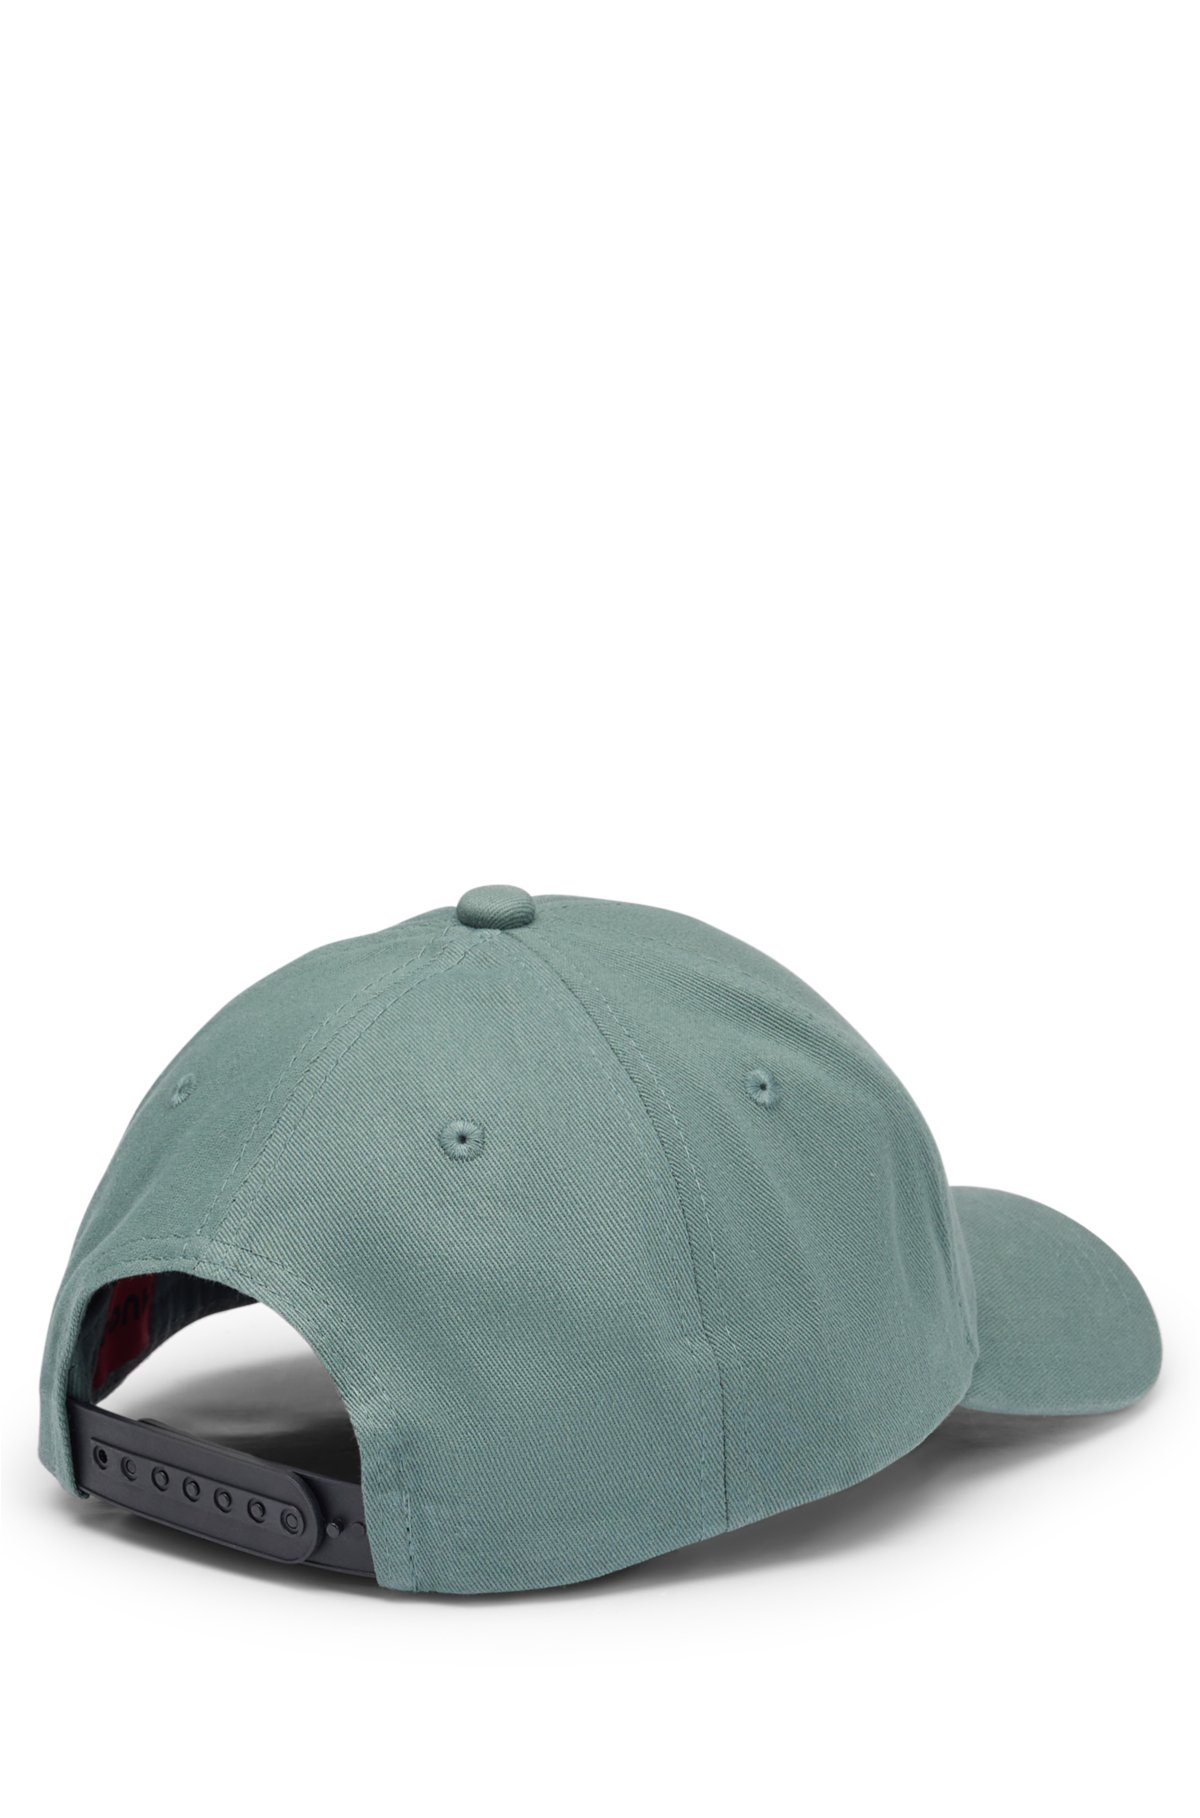 Cotton-twill cap with embroidered logo and snap closure, Light Green